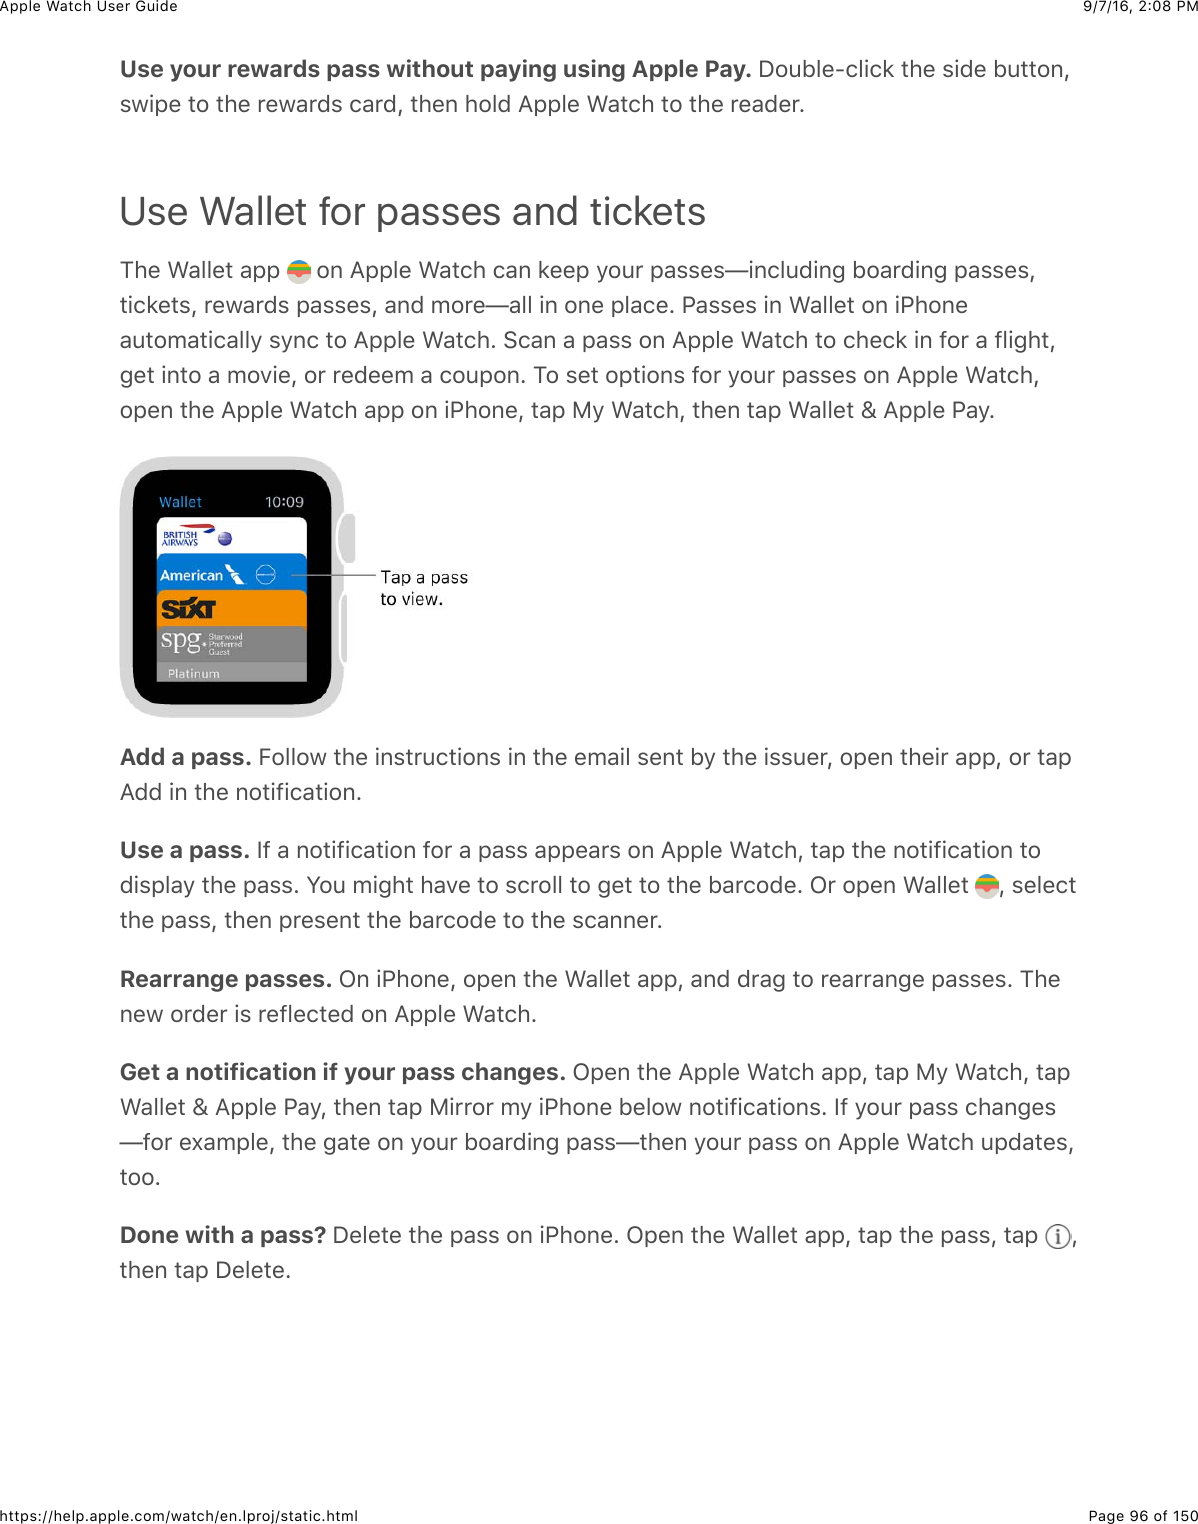 9/7/16, 2)08 PMApple Watch User GuidePage 96 of 150https://help.apple.com/watch/en.lproj/static.htmlUse your rewards pass without paying using Apple Pay. I#4B&quot;%?(&quot;+(8&amp;3)%&amp;$+0%&amp;B433#,J$7+2%&amp;3#&amp;3)%&amp;*%7&apos;*0$&amp;(&apos;*0J&amp;3)%,&amp;)#&quot;0&amp;=22&quot;%&amp;&gt;&apos;3()&amp;3#&amp;3)%&amp;*%&apos;0%*CUse Wallet for passes and tickets1)%&amp;&gt;&apos;&quot;&quot;%3&amp;&apos;22&amp; &amp;#,&amp;=22&quot;%&amp;&gt;&apos;3()&amp;(&apos;,&amp;8%%2&amp;/#4*&amp;2&apos;$$%$T+,(&quot;40+,-&amp;B#&apos;*0+,-&amp;2&apos;$$%$J3+(8%3$J&amp;*%7&apos;*0$&amp;2&apos;$$%$J&amp;&apos;,0&amp;5#*%T&apos;&quot;&quot;&amp;+,&amp;#,%&amp;2&quot;&apos;(%C&amp;G&apos;$$%$&amp;+,&amp;&gt;&apos;&quot;&quot;%3&amp;#,&amp;+G)#,%&apos;43#5&apos;3+(&apos;&quot;&quot;/&amp;$/,(&amp;3#&amp;=22&quot;%&amp;&gt;&apos;3()C&amp;6(&apos;,&amp;&apos;&amp;2&apos;$$&amp;#,&amp;=22&quot;%&amp;&gt;&apos;3()&amp;3#&amp;()%(8&amp;+,&amp;@#*&amp;&apos;&amp;@&quot;+-)3J-%3&amp;+,3#&amp;&apos;&amp;5#.+%J&amp;#*&amp;*%0%%5&amp;&apos;&amp;(#42#,C&amp;1#&amp;$%3&amp;#23+#,$&amp;@#*&amp;/#4*&amp;2&apos;$$%$&amp;#,&amp;=22&quot;%&amp;&gt;&apos;3()J#2%,&amp;3)%&amp;=22&quot;%&amp;&gt;&apos;3()&amp;&apos;22&amp;#,&amp;+G)#,%J&amp;3&apos;2&amp;F/&amp;&gt;&apos;3()J&amp;3)%,&amp;3&apos;2&amp;&gt;&apos;&quot;&quot;%3&amp;h&amp;=22&quot;%&amp;G&apos;/CAdd a pass. E#&quot;&quot;#7&amp;3)%&amp;+,$3*4(3+#,$&amp;+,&amp;3)%&amp;%5&apos;+&quot;&amp;$%,3&amp;B/&amp;3)%&amp;+$$4%*J&amp;#2%,&amp;3)%+*&amp;&apos;22J&amp;#*&amp;3&apos;2=00&amp;+,&amp;3)%&amp;,#3+@+(&apos;3+#,CUse a pass. Y@&amp;&apos;&amp;,#3+@+(&apos;3+#,&amp;@#*&amp;&apos;&amp;2&apos;$$&amp;&apos;22%&apos;*$&amp;#,&amp;=22&quot;%&amp;&gt;&apos;3()J&amp;3&apos;2&amp;3)%&amp;,#3+@+(&apos;3+#,&amp;3#0+$2&quot;&apos;/&amp;3)%&amp;2&apos;$$C&amp;S#4&amp;5+-)3&amp;)&apos;.%&amp;3#&amp;$(*#&quot;&quot;&amp;3#&amp;-%3&amp;3#&amp;3)%&amp;B&apos;*(#0%C&amp;L*&amp;#2%,&amp;&gt;&apos;&quot;&quot;%3&amp; J&amp;$%&quot;%(33)%&amp;2&apos;$$J&amp;3)%,&amp;2*%$%,3&amp;3)%&amp;B&apos;*(#0%&amp;3#&amp;3)%&amp;$(&apos;,,%*CRearrange passes. L,&amp;+G)#,%J&amp;#2%,&amp;3)%&amp;&gt;&apos;&quot;&quot;%3&amp;&apos;22J&amp;&apos;,0&amp;0*&apos;-&amp;3#&amp;*%&apos;**&apos;,-%&amp;2&apos;$$%$C&amp;1)%,%7&amp;#*0%*&amp;+$&amp;*%@&quot;%(3%0&amp;#,&amp;=22&quot;%&amp;&gt;&apos;3()CGet a notification if your pass changes. L2%,&amp;3)%&amp;=22&quot;%&amp;&gt;&apos;3()&amp;&apos;22J&amp;3&apos;2&amp;F/&amp;&gt;&apos;3()J&amp;3&apos;2&gt;&apos;&quot;&quot;%3&amp;h&amp;=22&quot;%&amp;G&apos;/J&amp;3)%,&amp;3&apos;2&amp;F+**#*&amp;5/&amp;+G)#,%&amp;B%&quot;#7&amp;,#3+@+(&apos;3+#,$C&amp;Y@&amp;/#4*&amp;2&apos;$$&amp;()&apos;,-%$T@#*&amp;%U&apos;52&quot;%J&amp;3)%&amp;-&apos;3%&amp;#,&amp;/#4*&amp;B#&apos;*0+,-&amp;2&apos;$$T3)%,&amp;/#4*&amp;2&apos;$$&amp;#,&amp;=22&quot;%&amp;&gt;&apos;3()&amp;420&apos;3%$J3##CDone with a pass? I%&quot;%3%&amp;3)%&amp;2&apos;$$&amp;#,&amp;+G)#,%C&amp;L2%,&amp;3)%&amp;&gt;&apos;&quot;&quot;%3&amp;&apos;22J&amp;3&apos;2&amp;3)%&amp;2&apos;$$J&amp;3&apos;2&amp; J3)%,&amp;3&apos;2&amp;I%&quot;%3%C